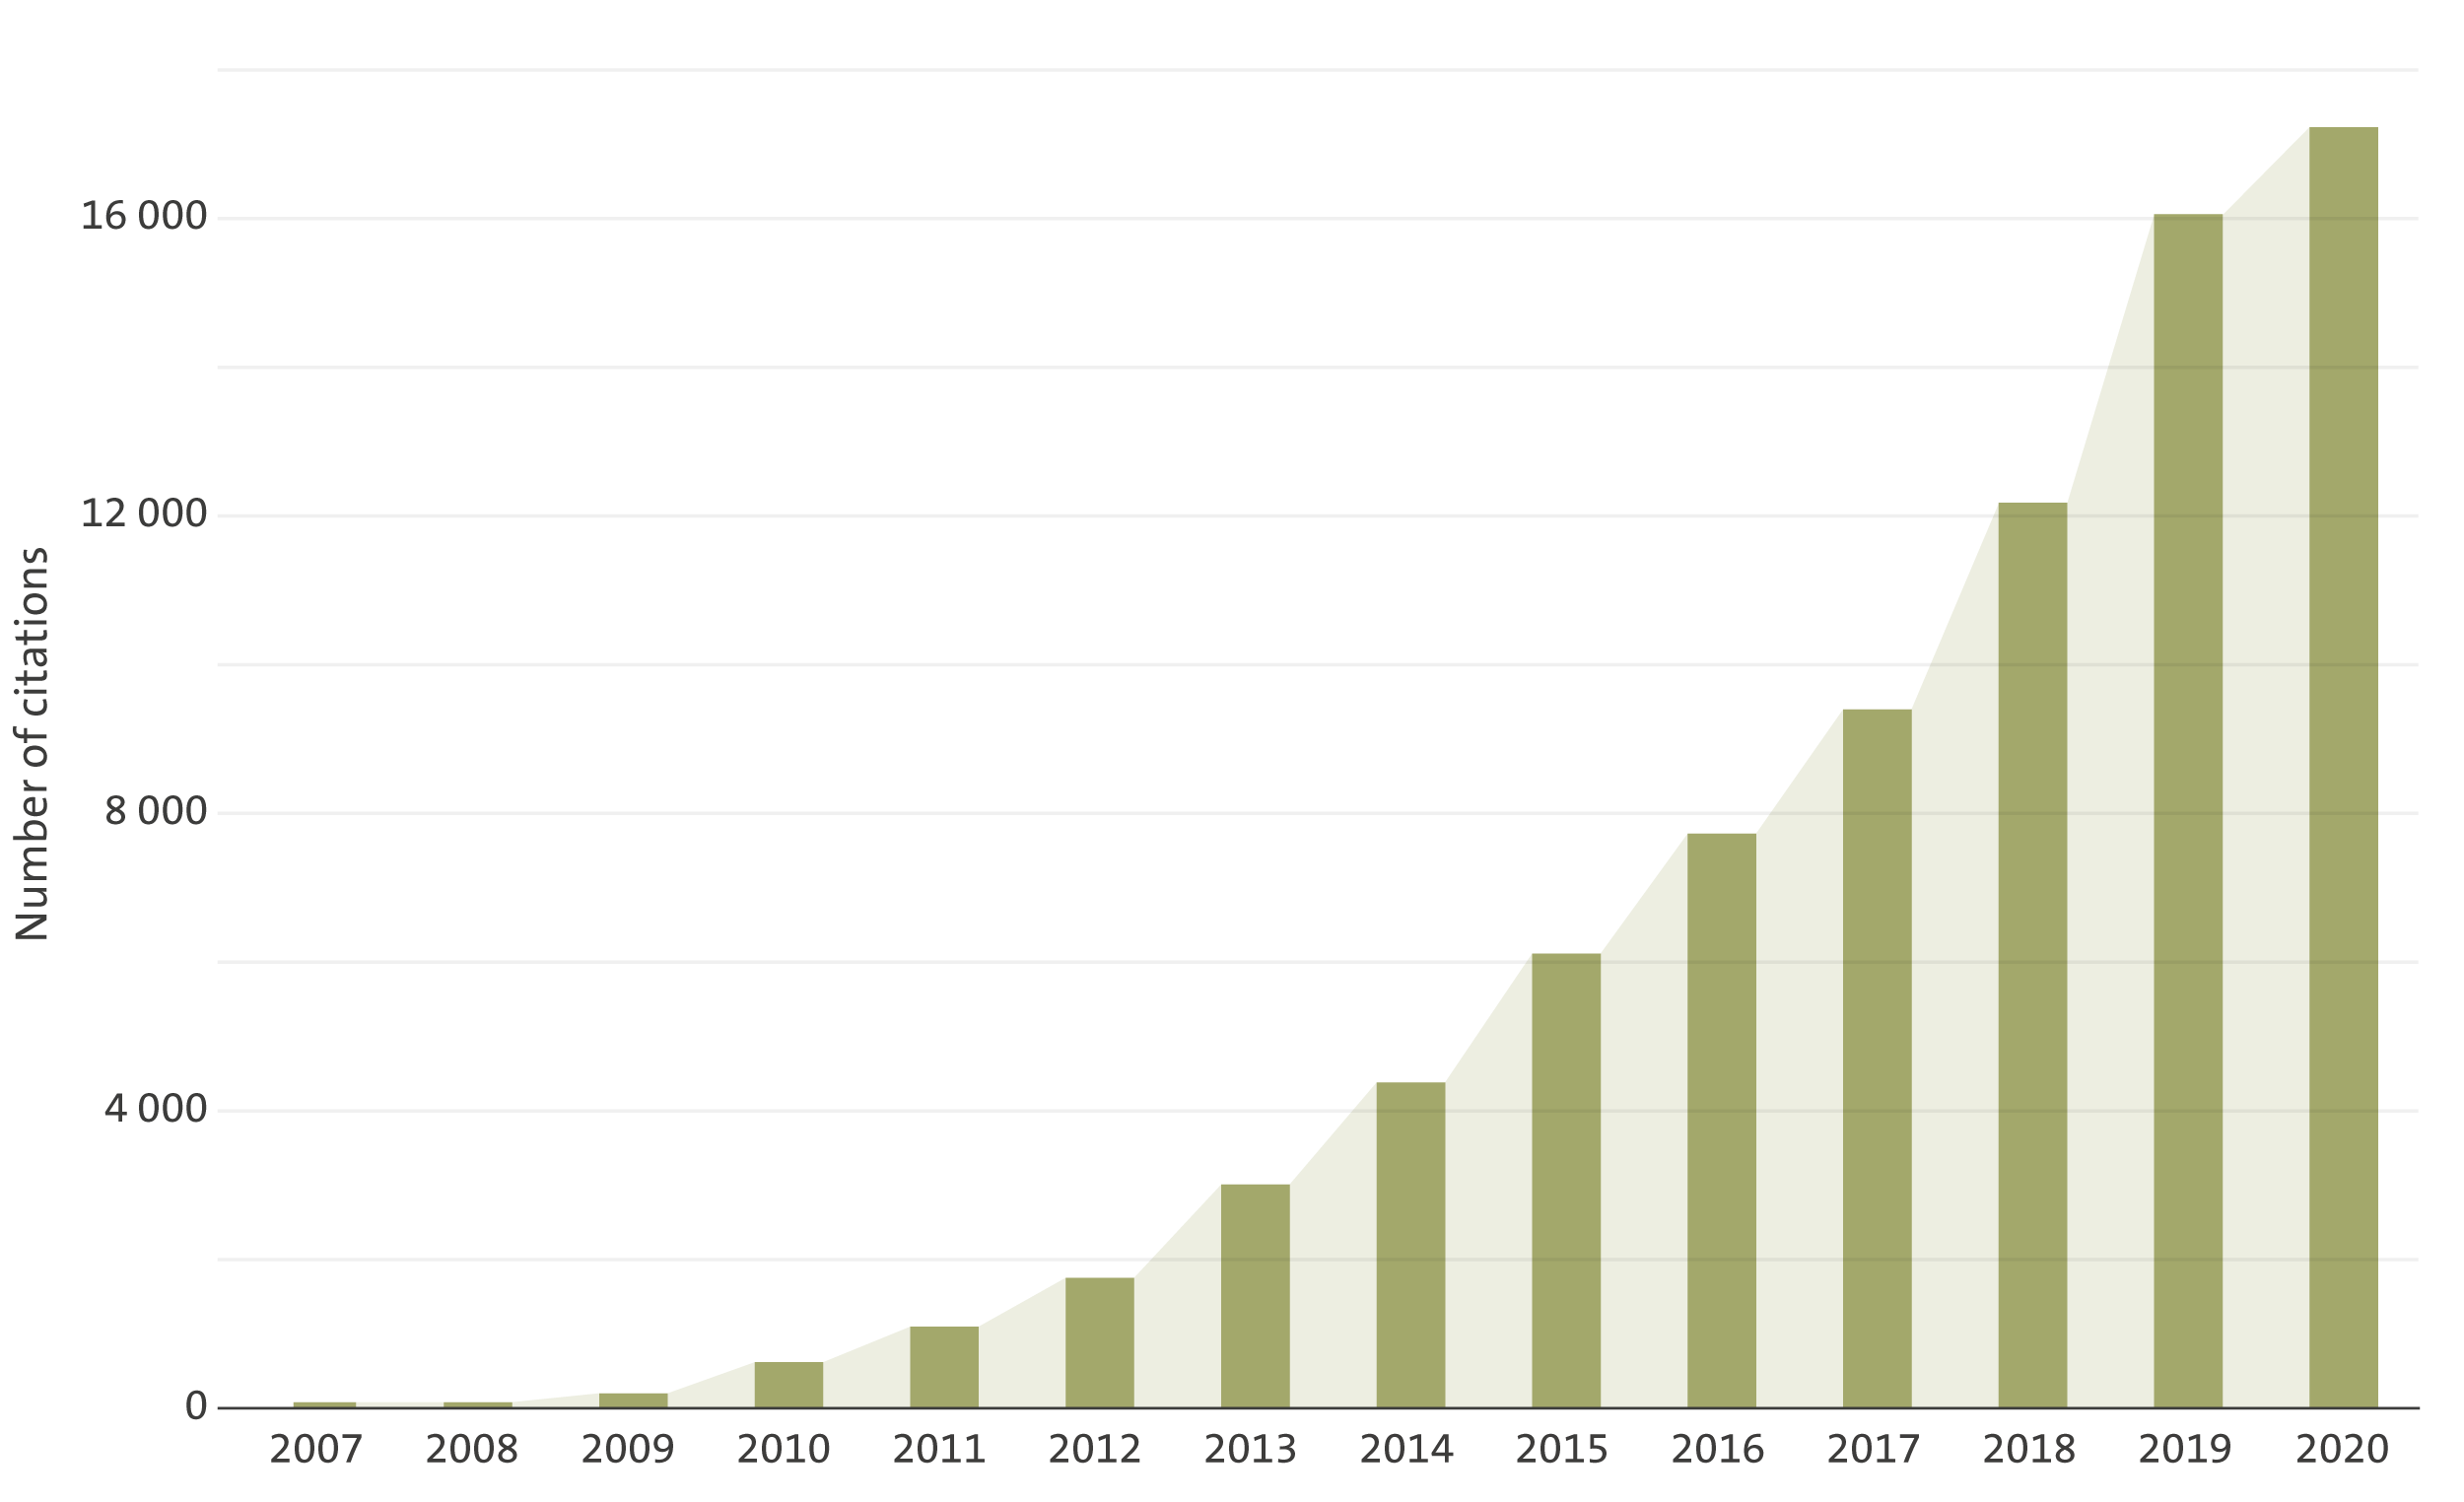 Number of annual citations of scientific publications produced by the centre